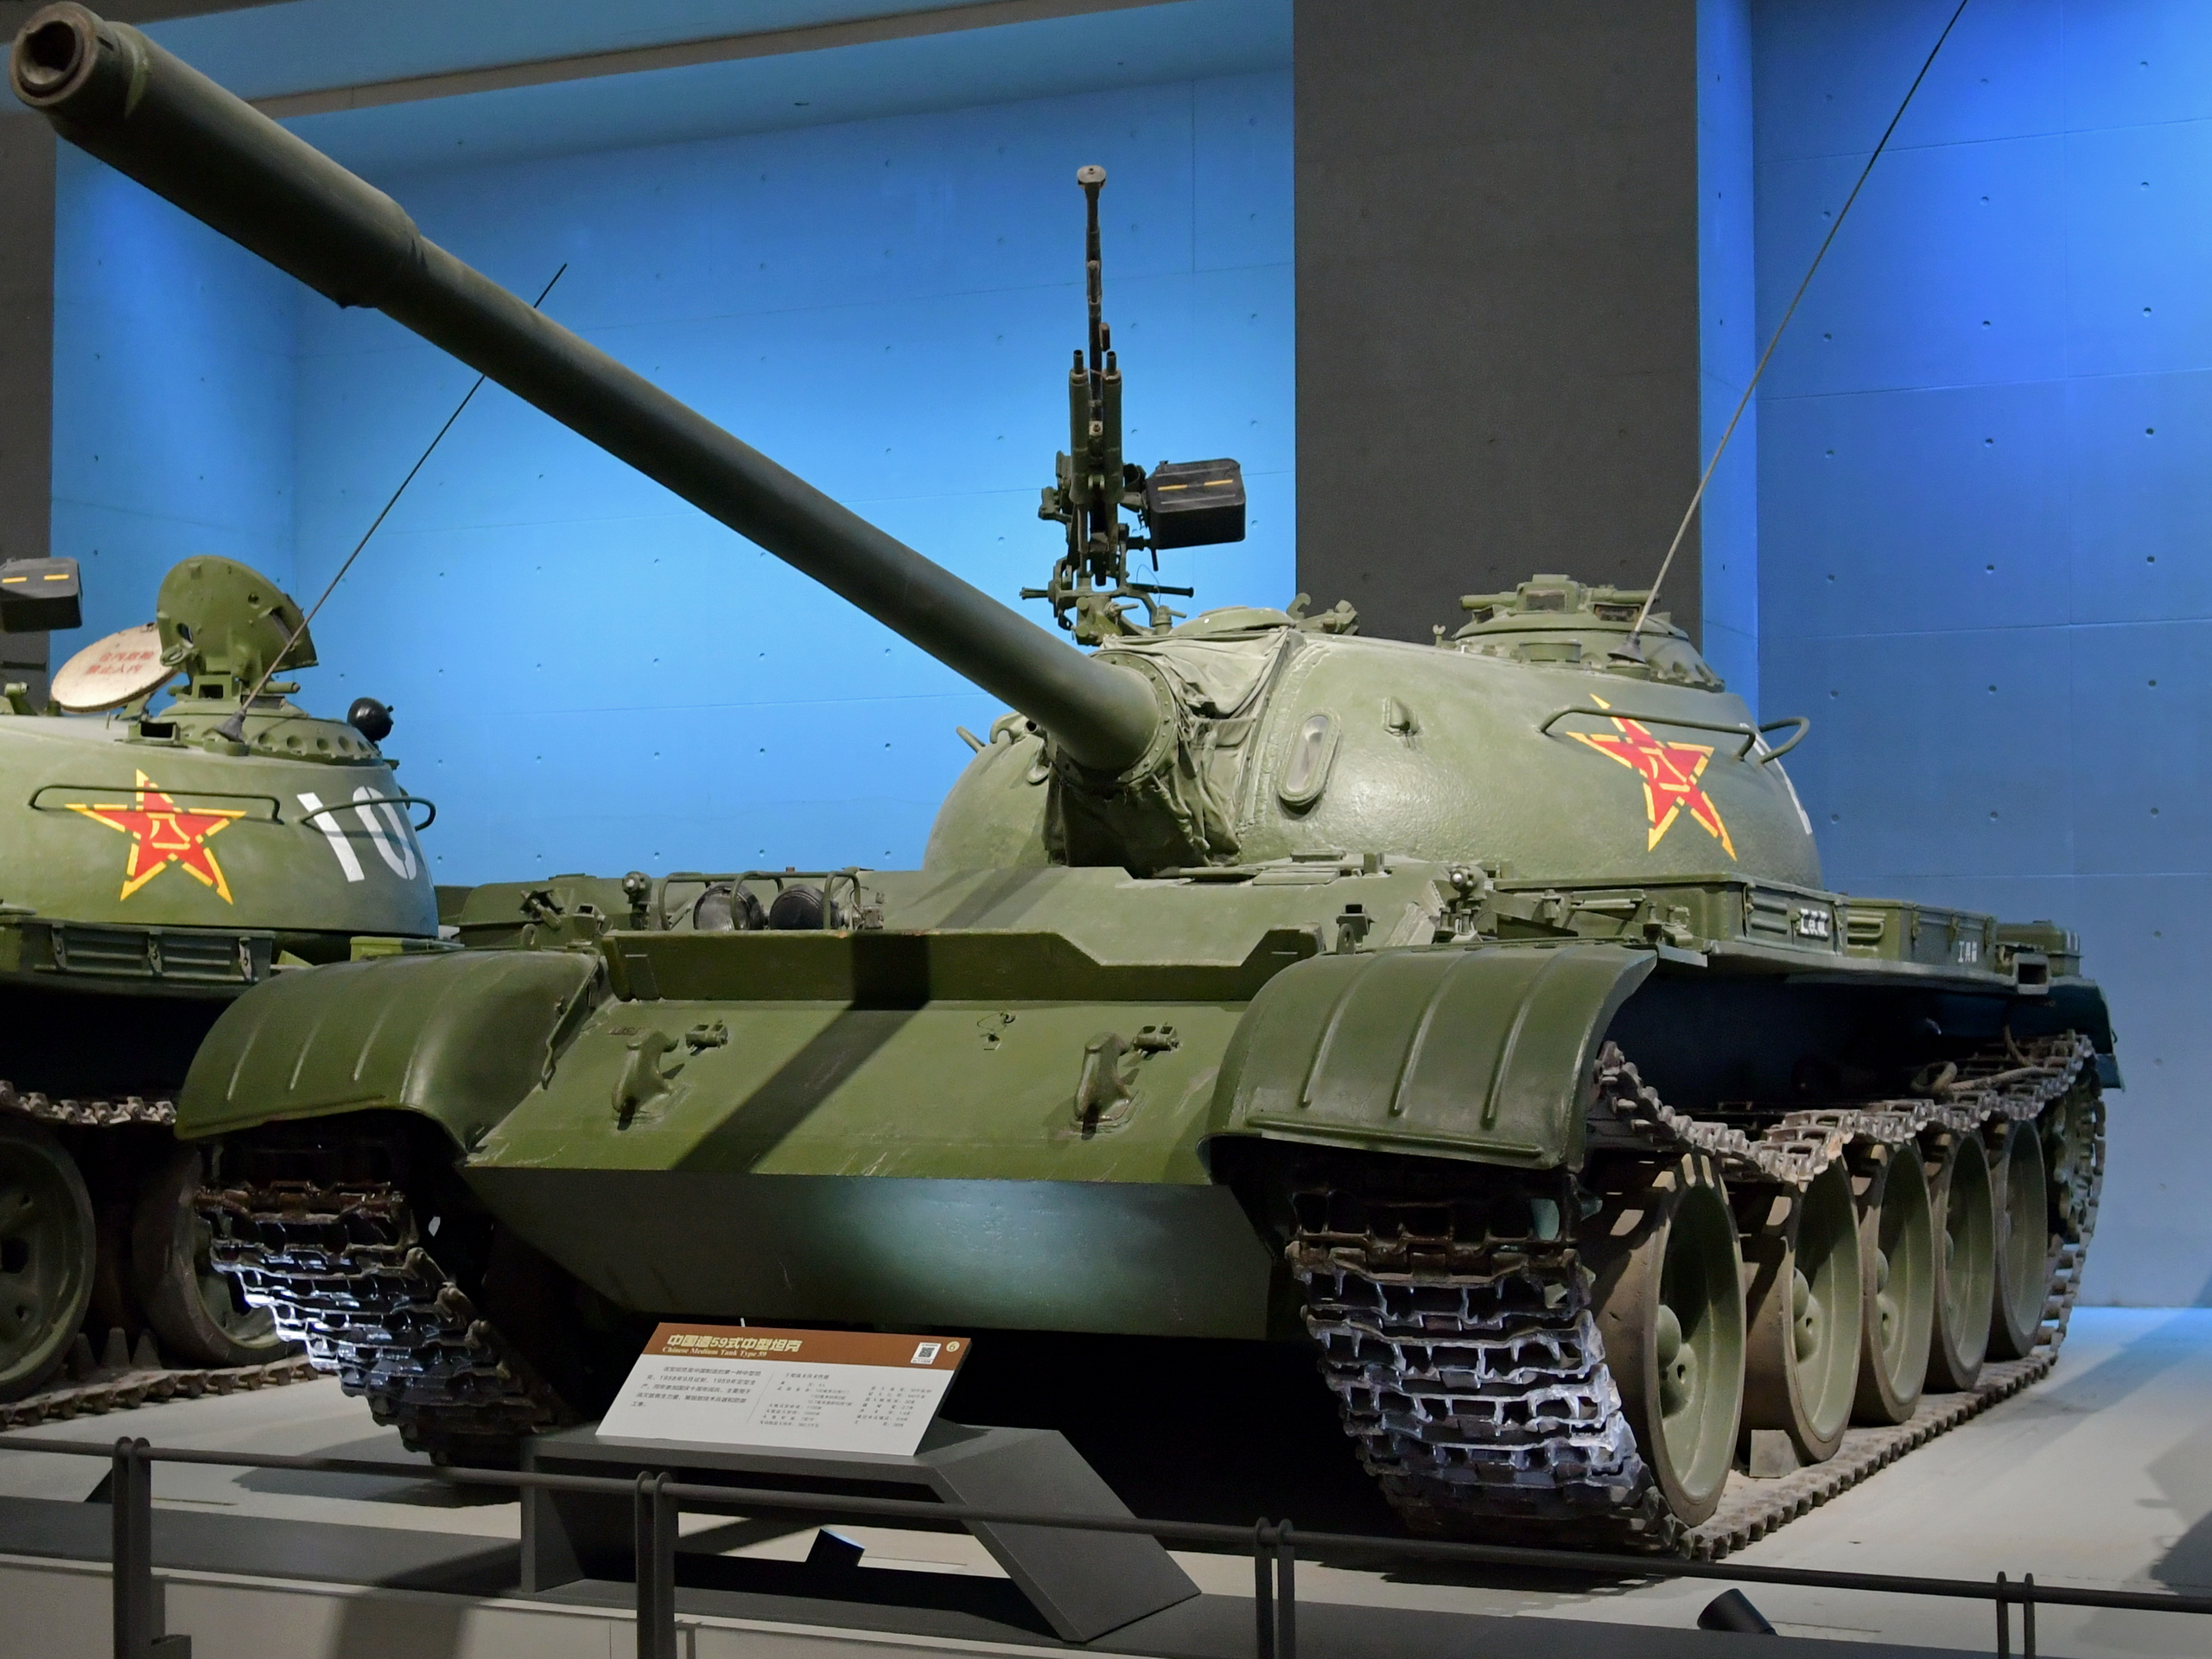 Type 59 tank in Military Museum of the Chinese People's Revolution 201...